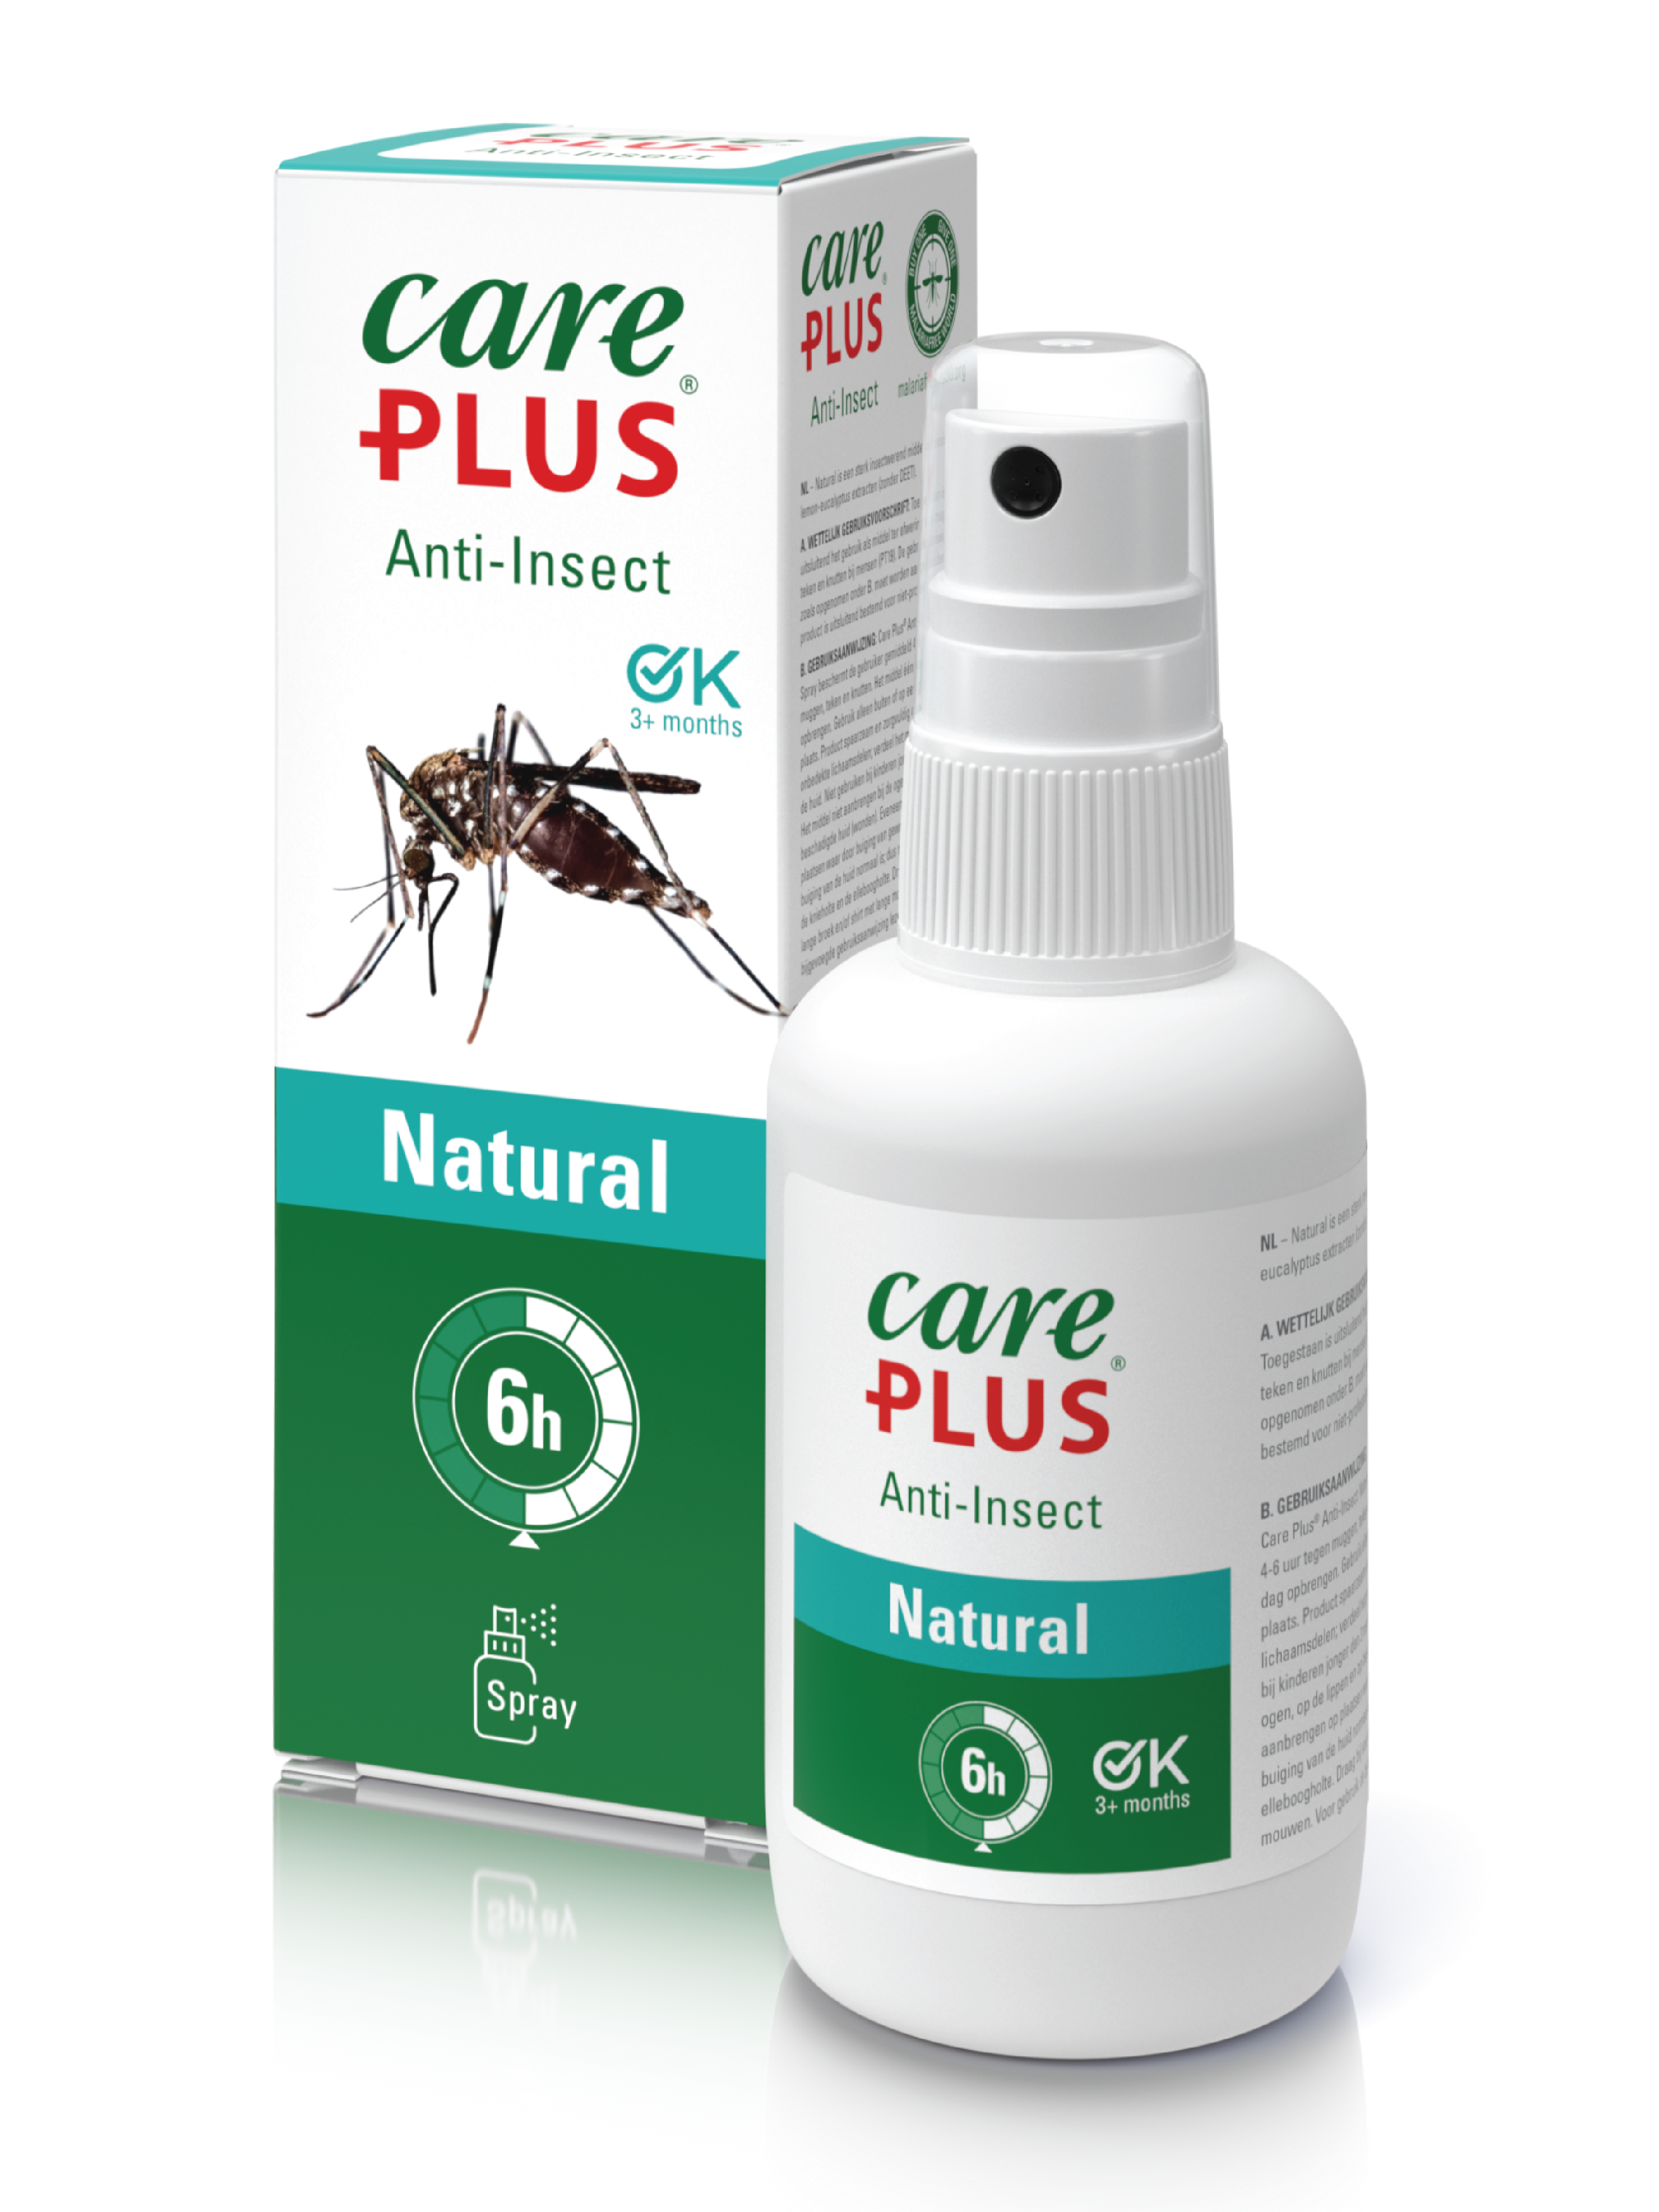 Care Plus Anti-Insect Natural, spray, 60 ml